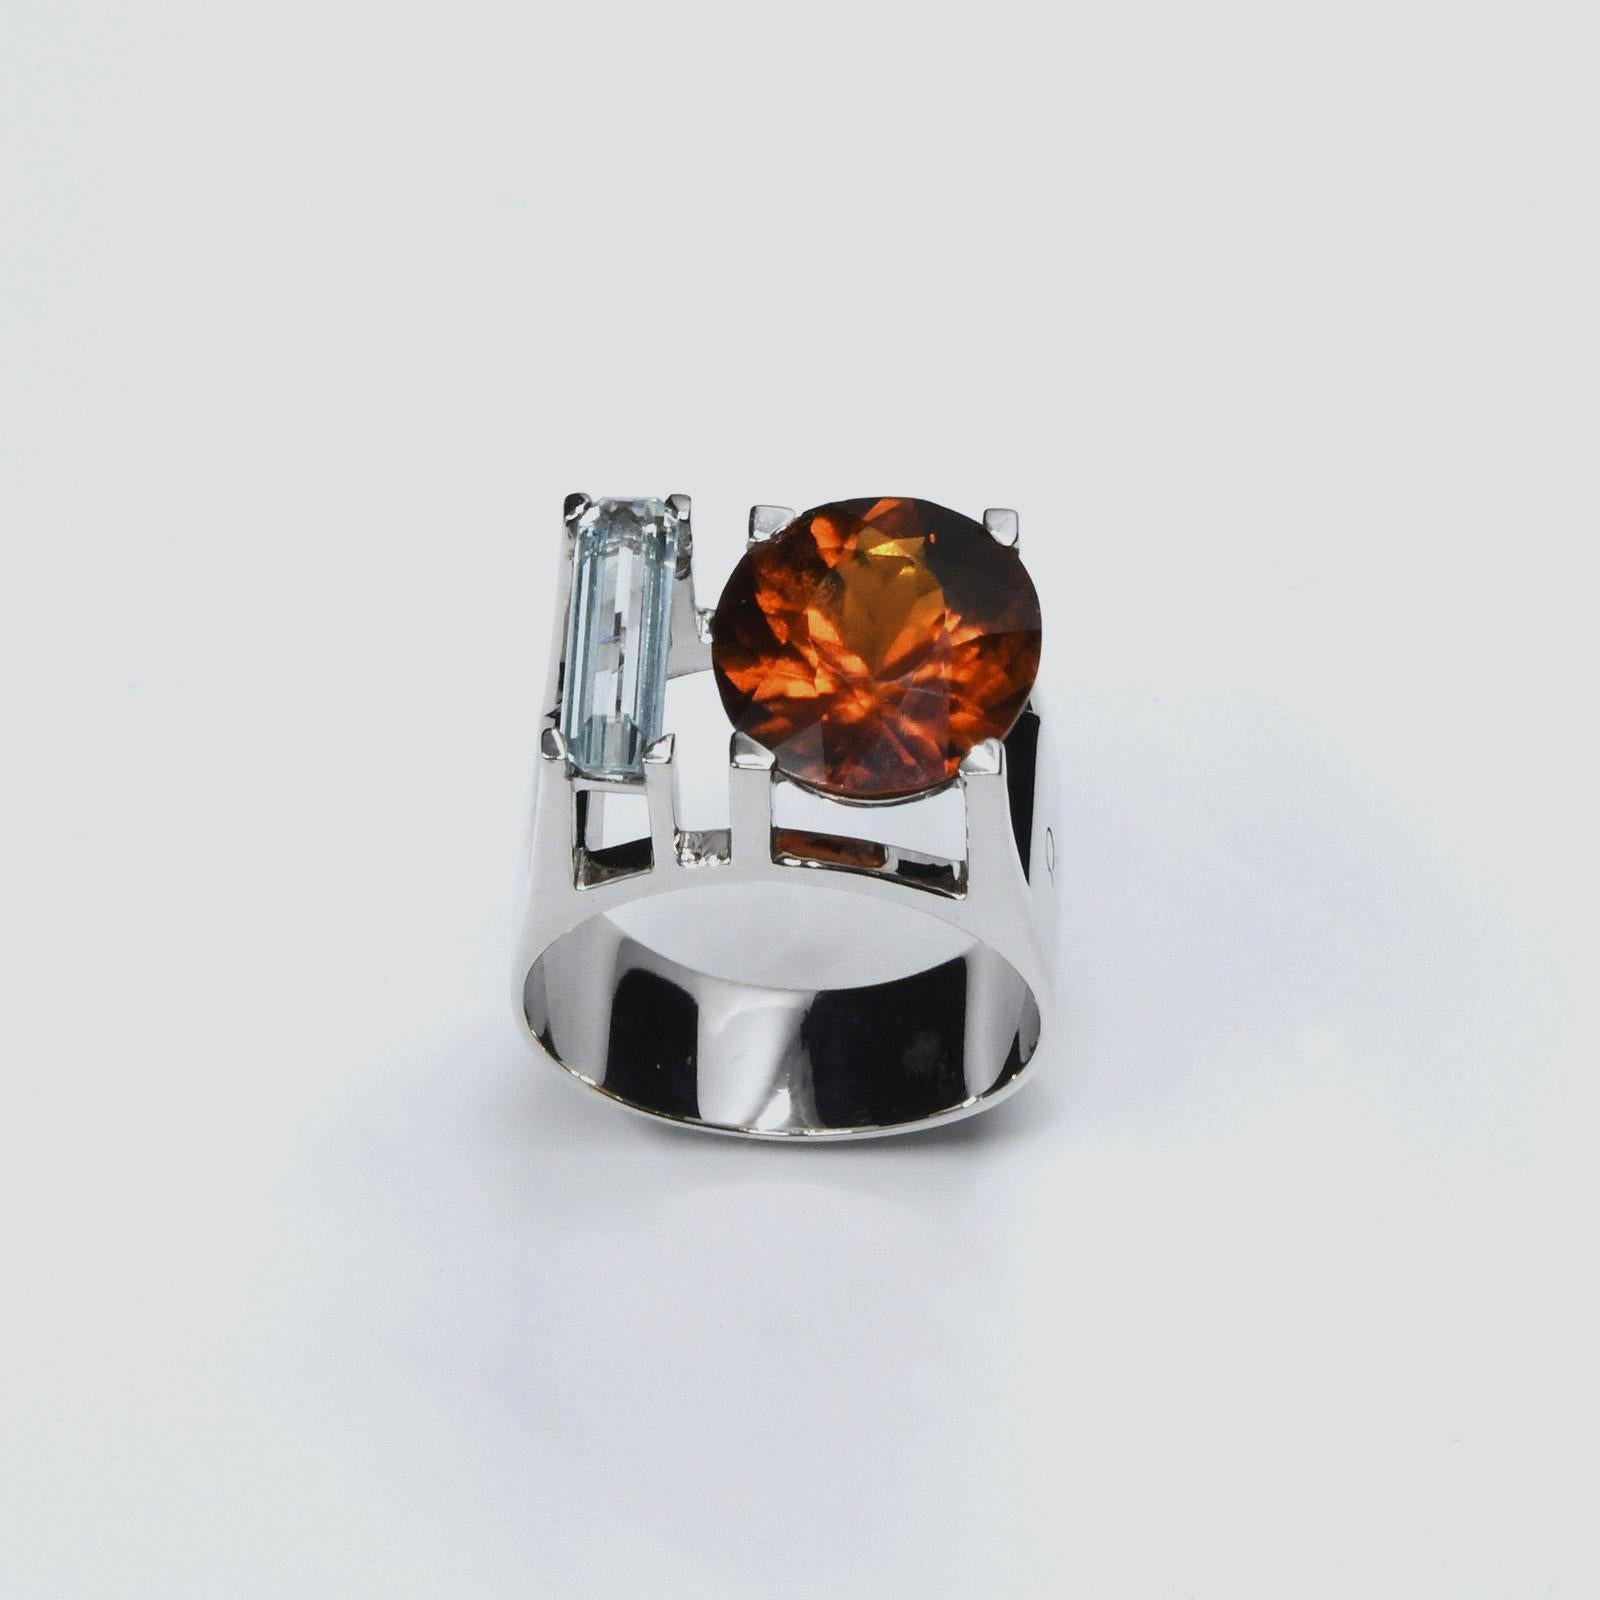 Contemporary Ame de Feu Ring with 5.9 ct Hessonite Garnet, 0.84 ct Aquamarine, 7.13g 18k Gold For Sale